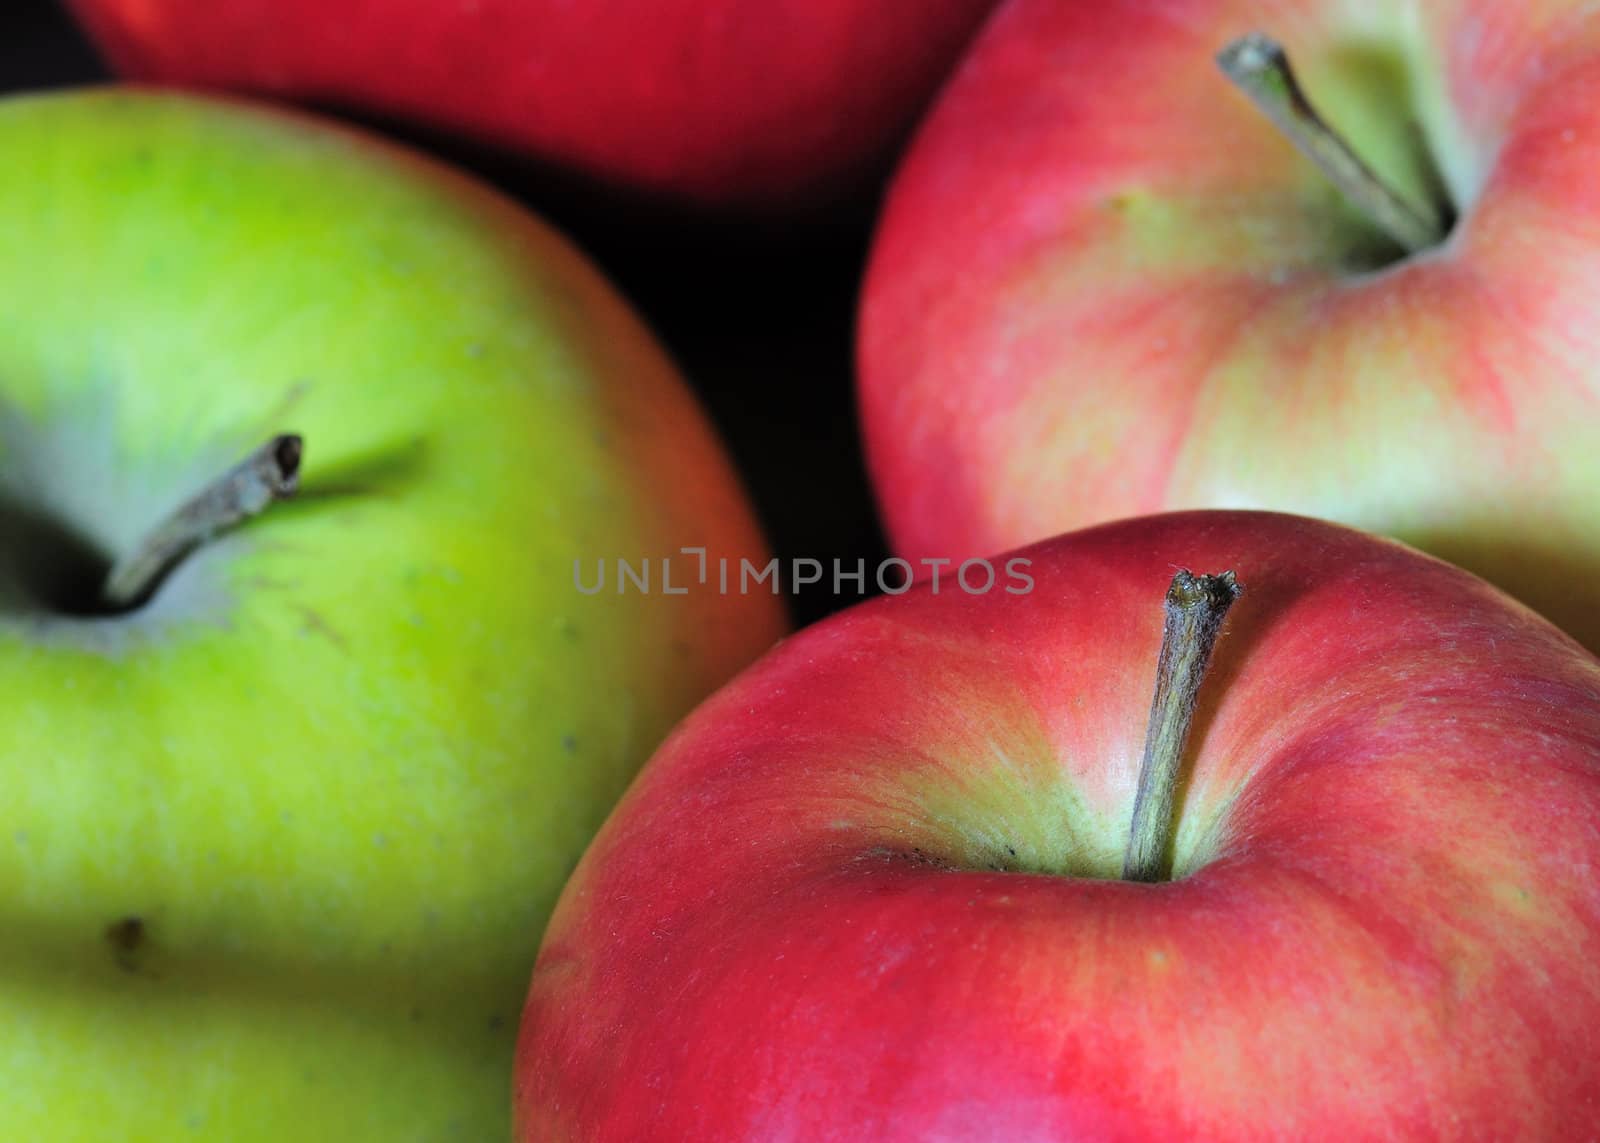 Apples by brm1949